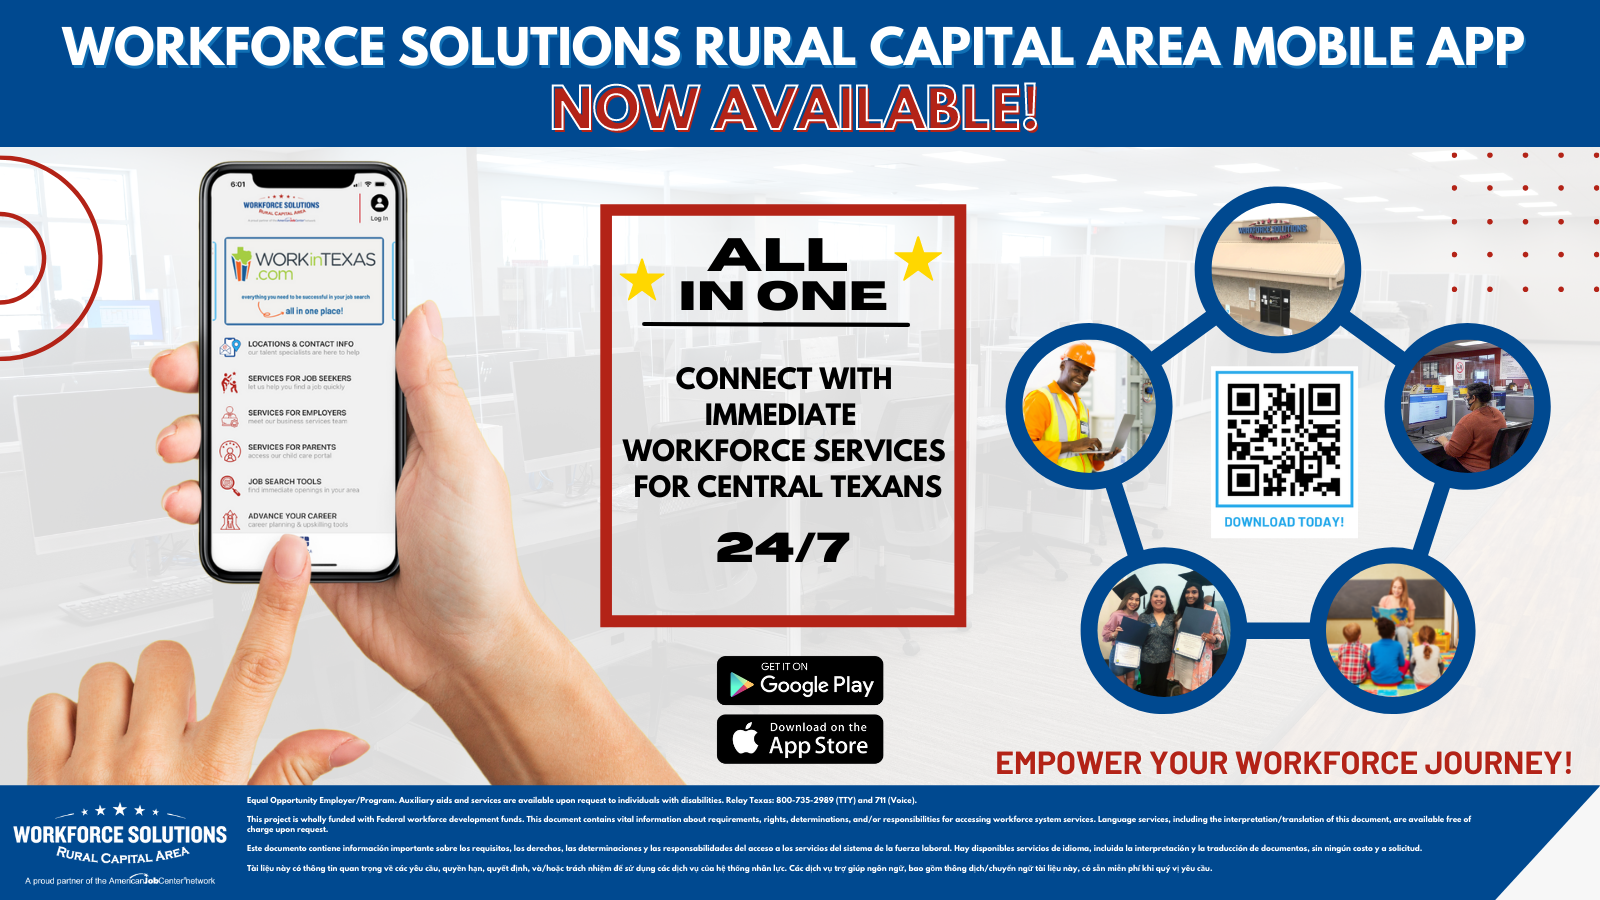 WSRCA Mobile App is now available